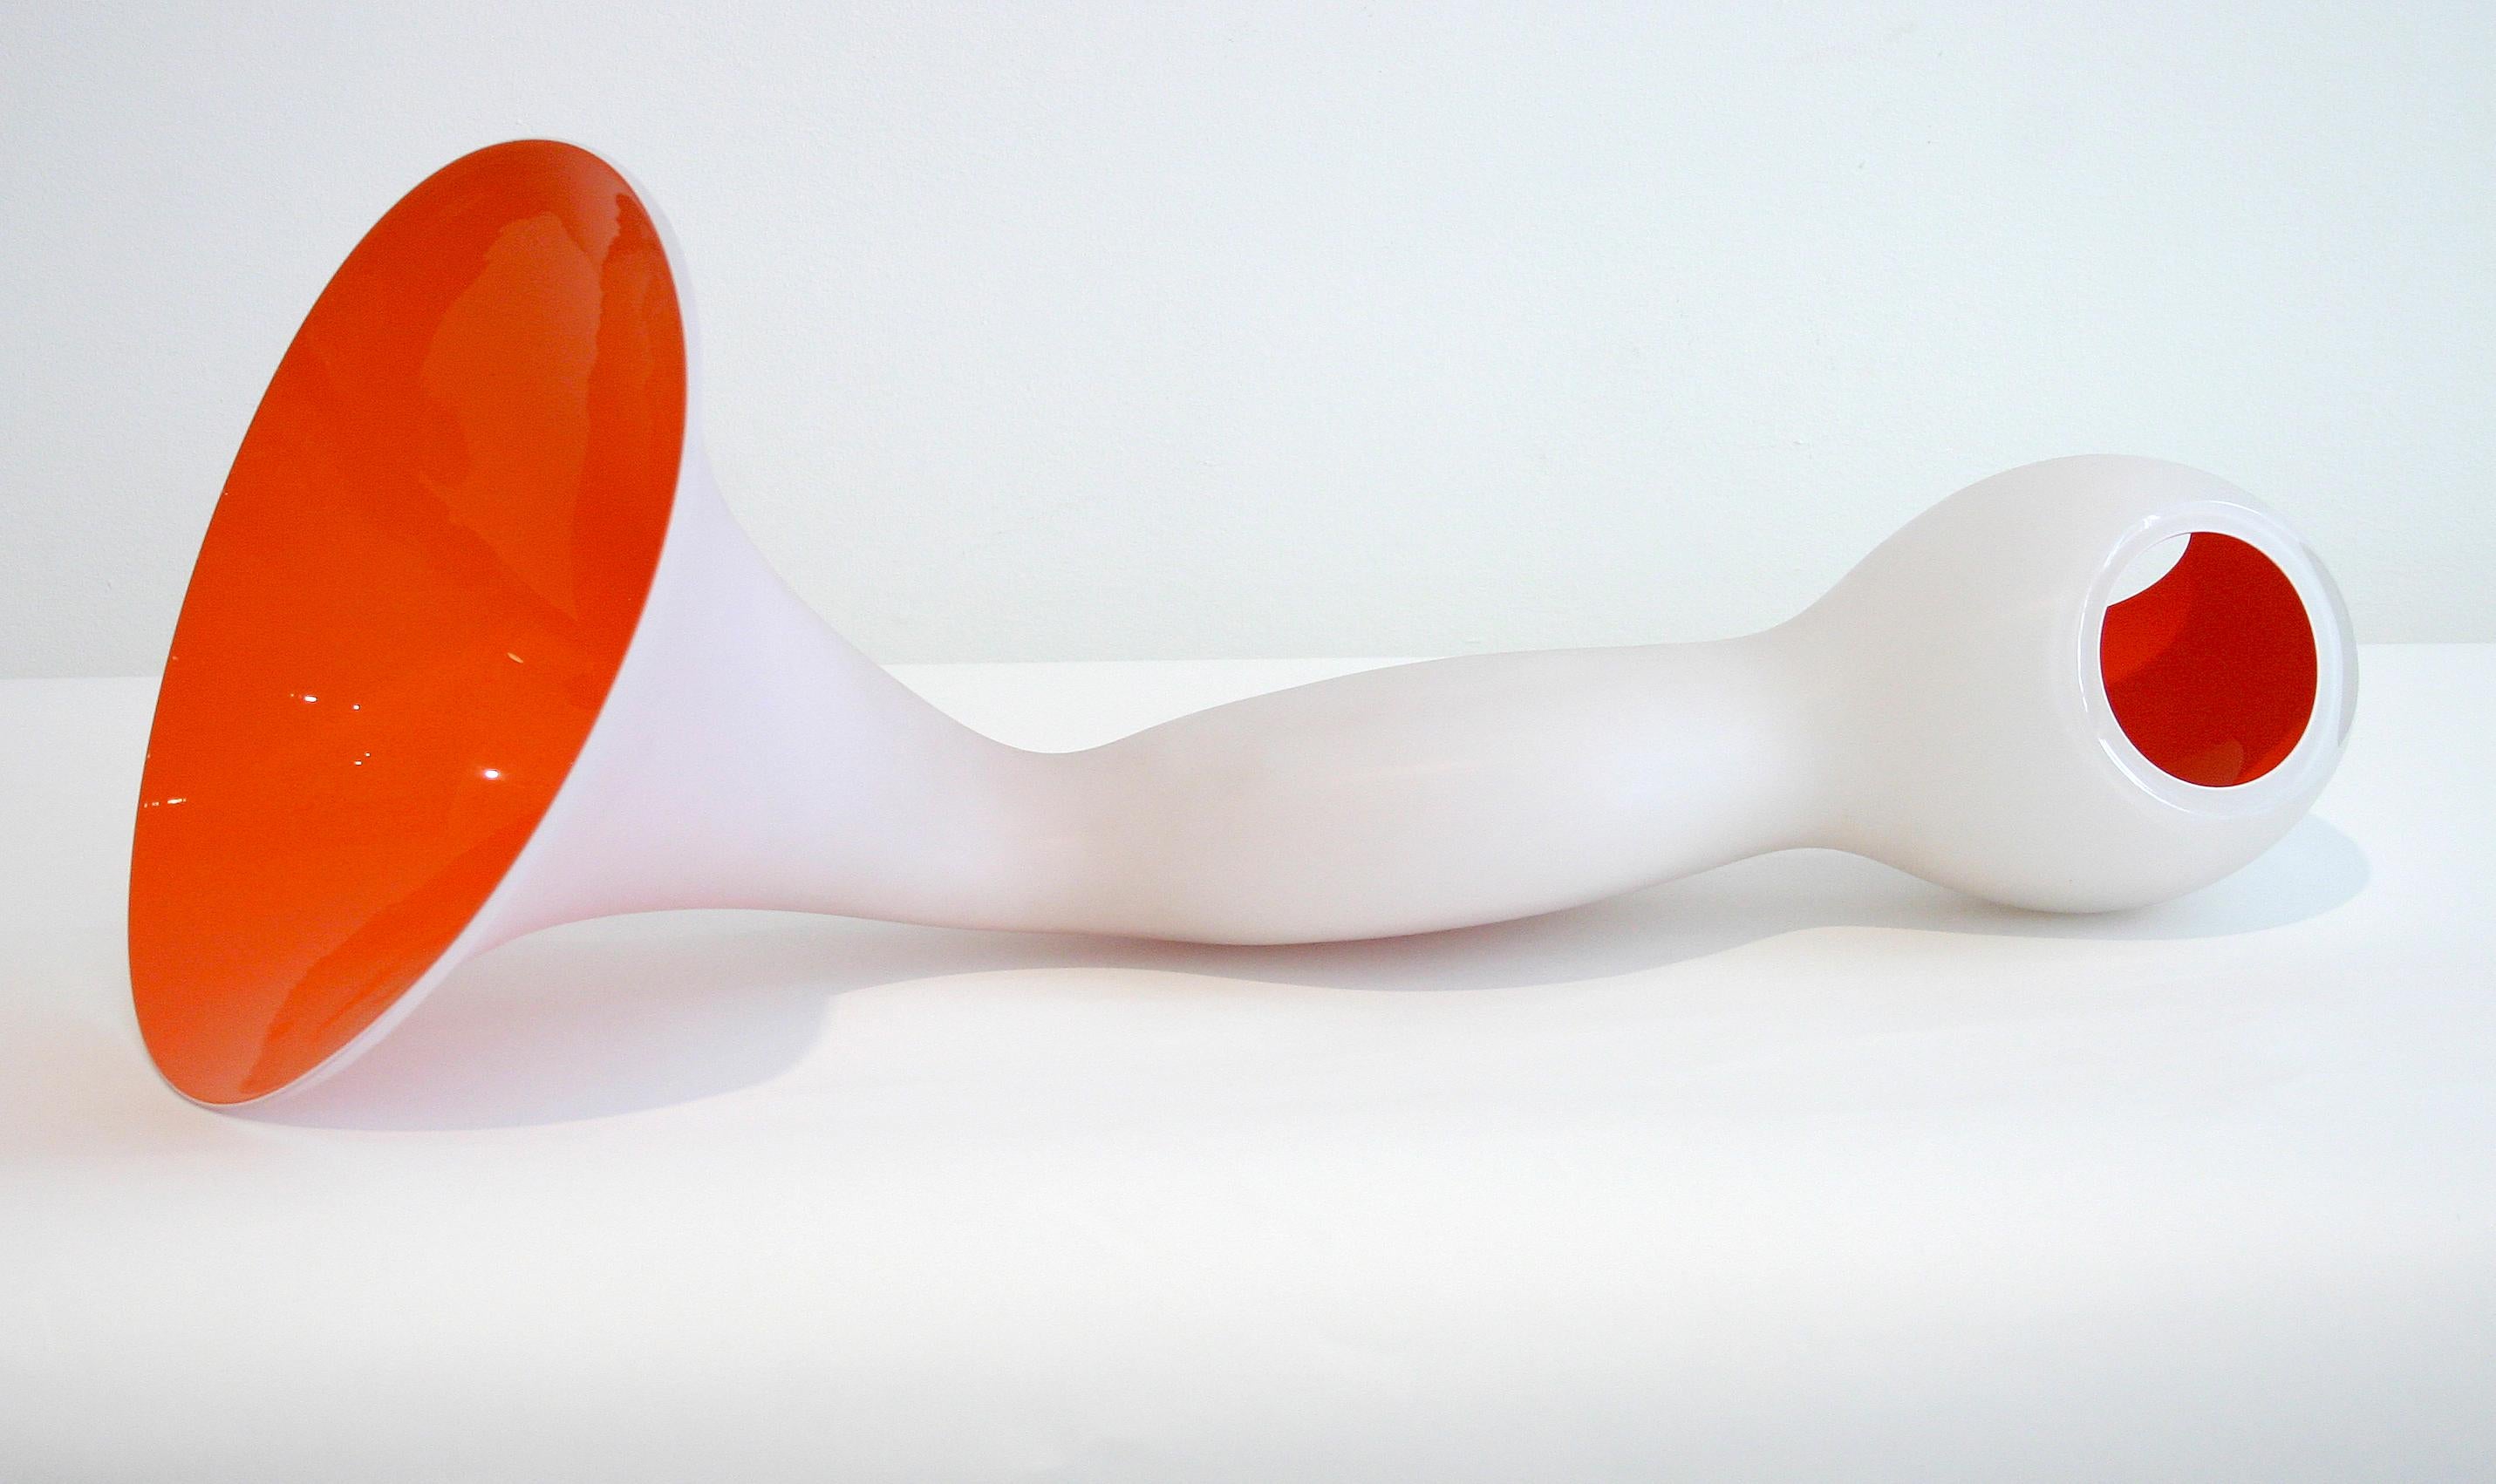 Biomorphic sculpture with red-orange interior in hand blown glass. Designed and made by Jeff Zimmerman, USA, 2006.

Limited number available. Please note that each item may differ slightly in color and shape.